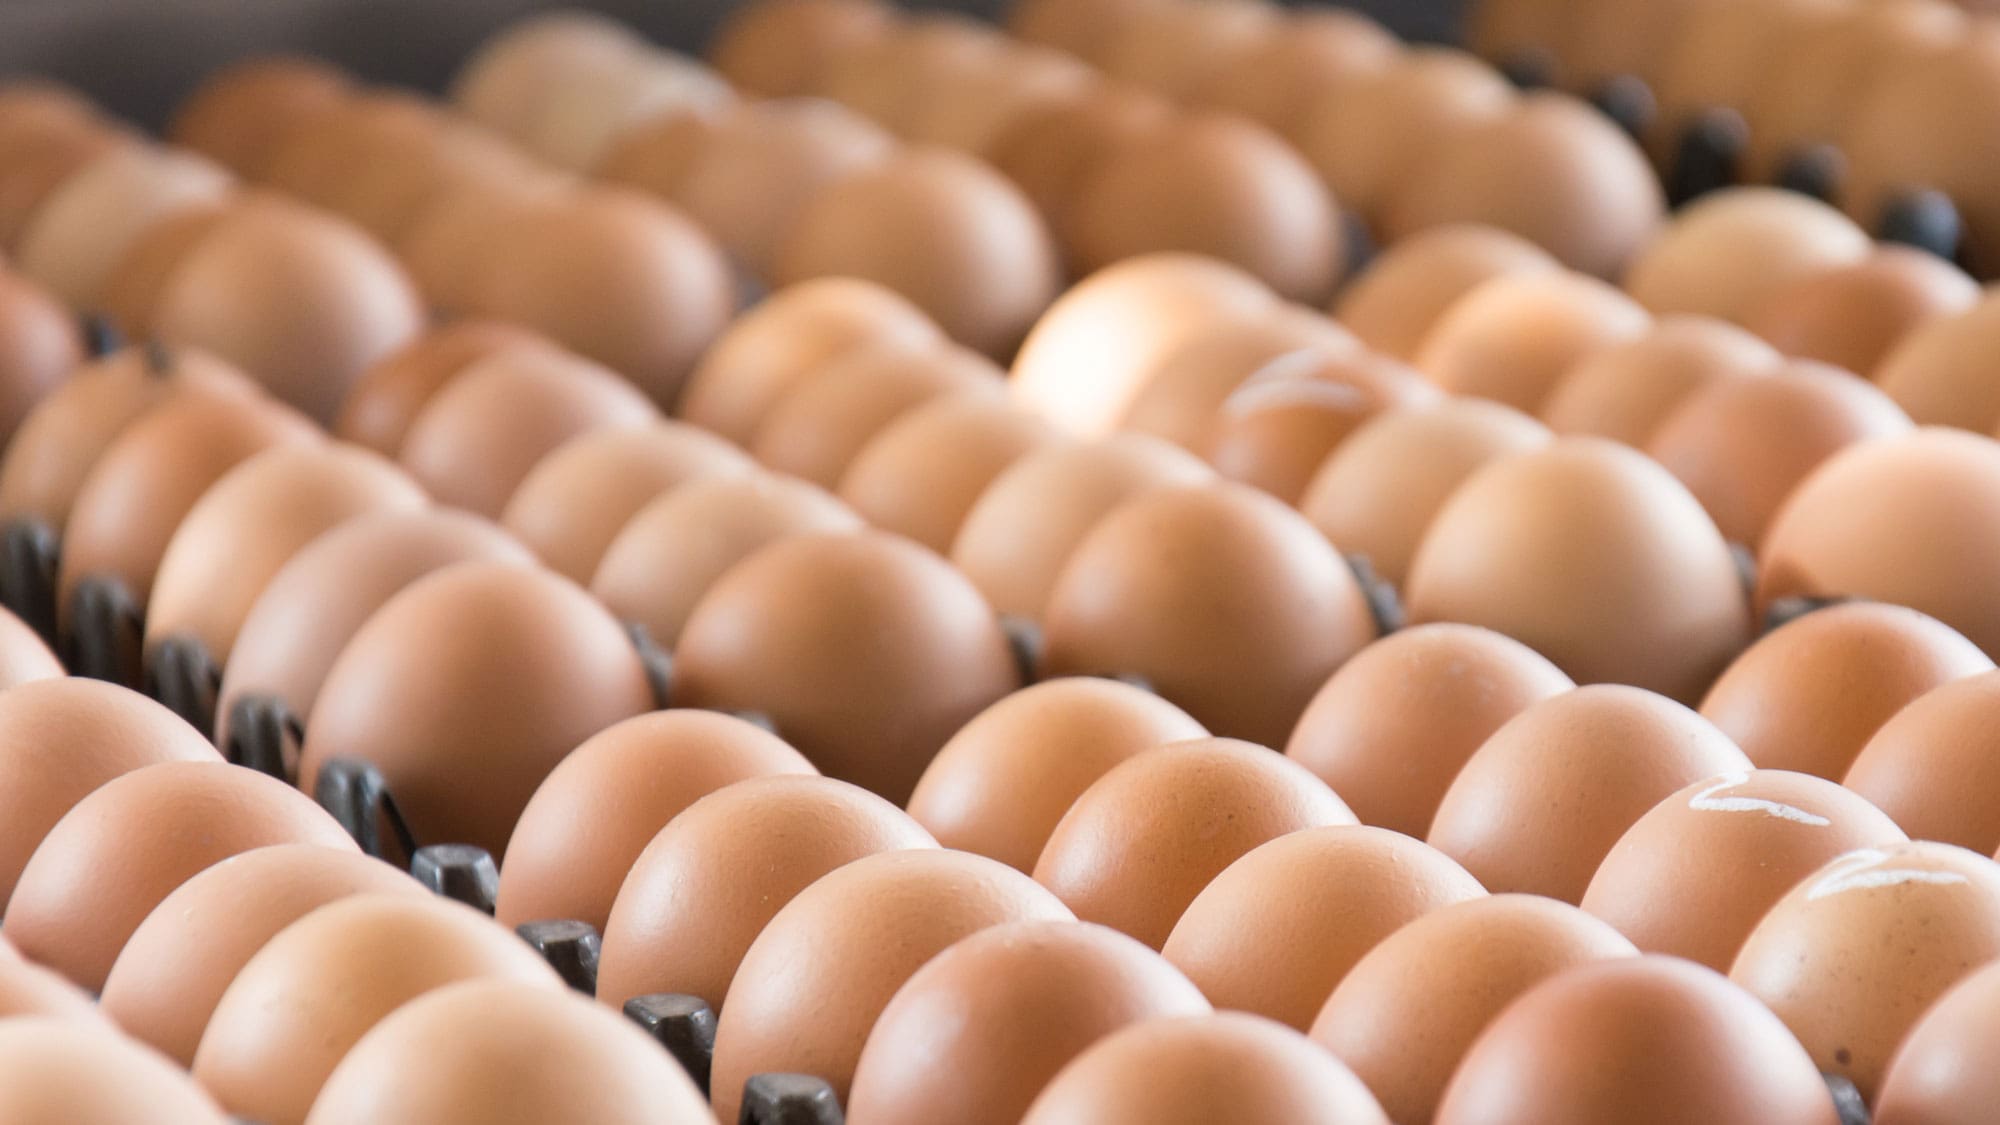 Rows of brown eggs in open cartons